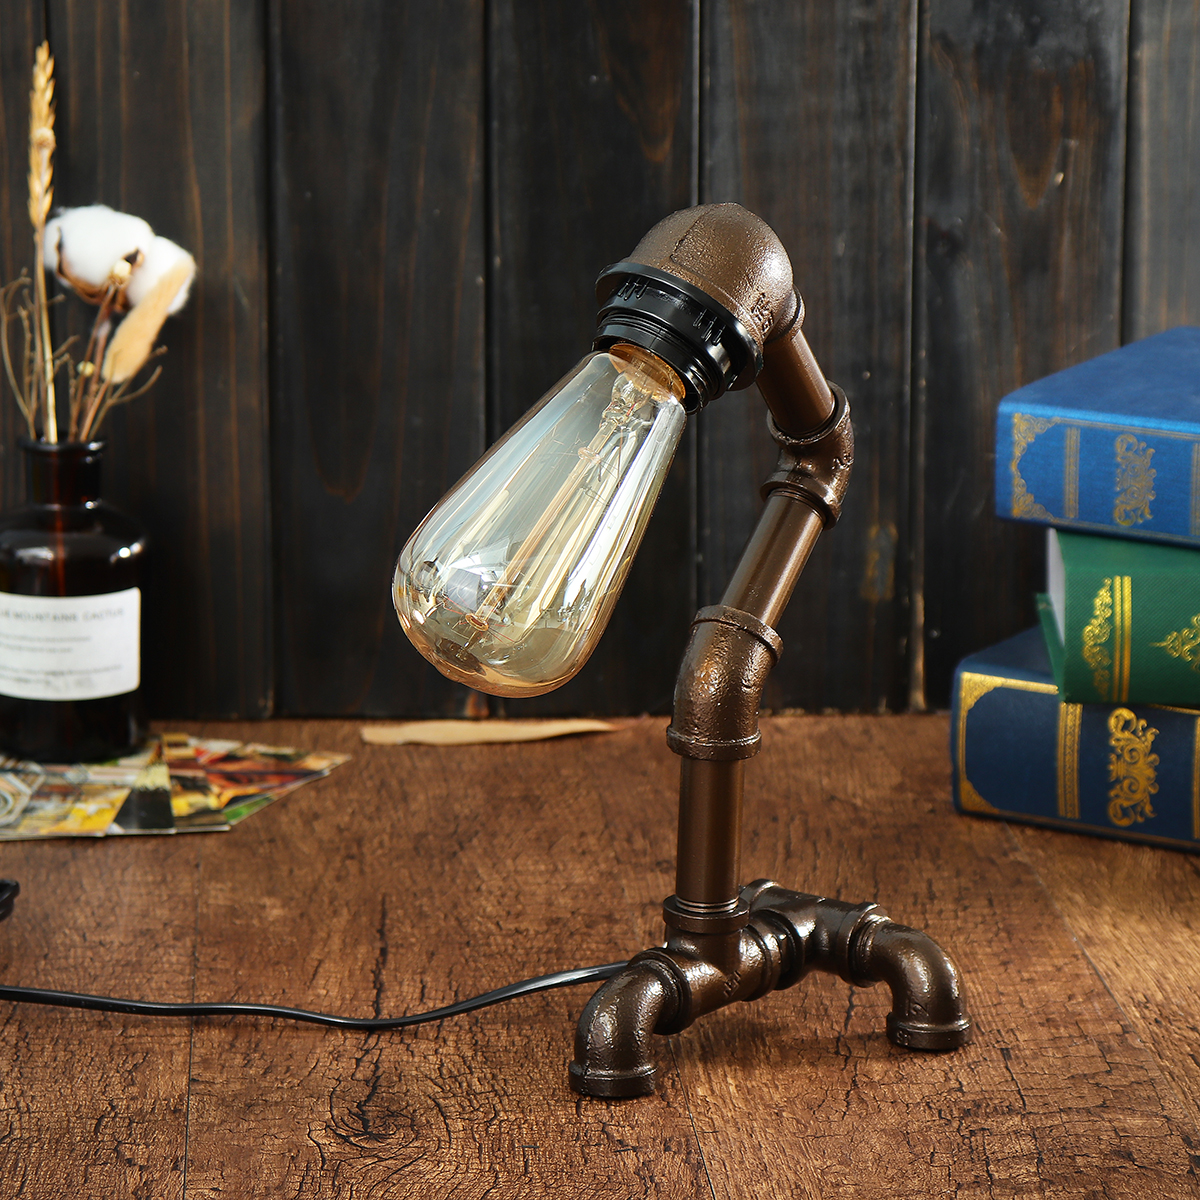 Vintage-Industrial-Robot-Light-Water-Pipe-Steampunk-Desk-Table-Lamp-Bedroom-E27-1431974-4